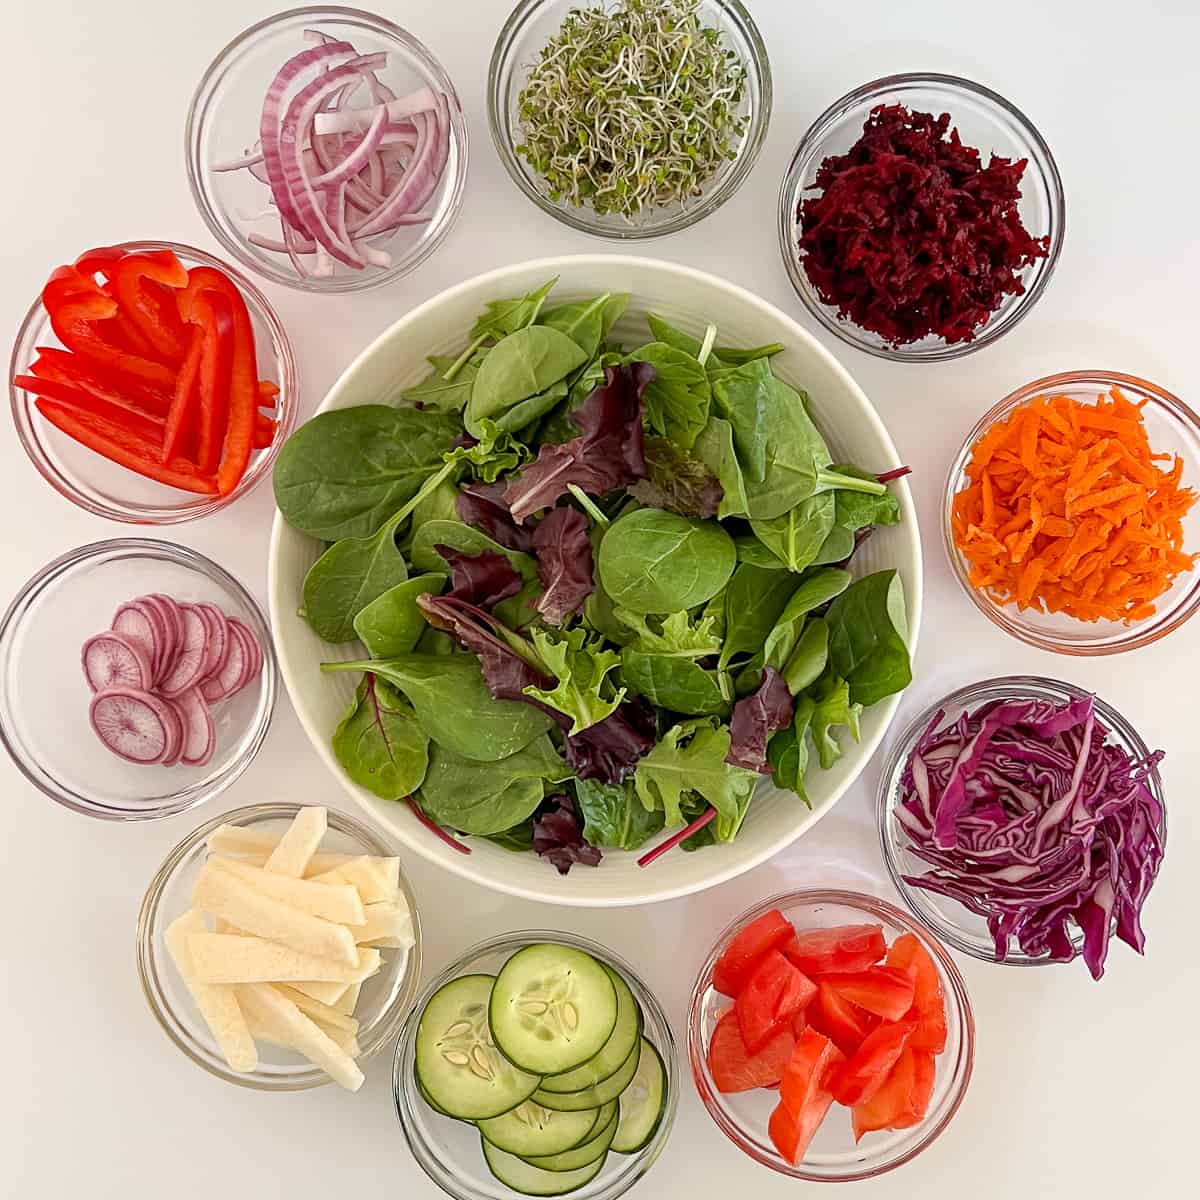 top view of ingredients for rainbow salad: mixed baby greens, broccoli sprouts, beets, carrot, onion, bell pepper, radish, jicama, cucumber, tomato, cabbage